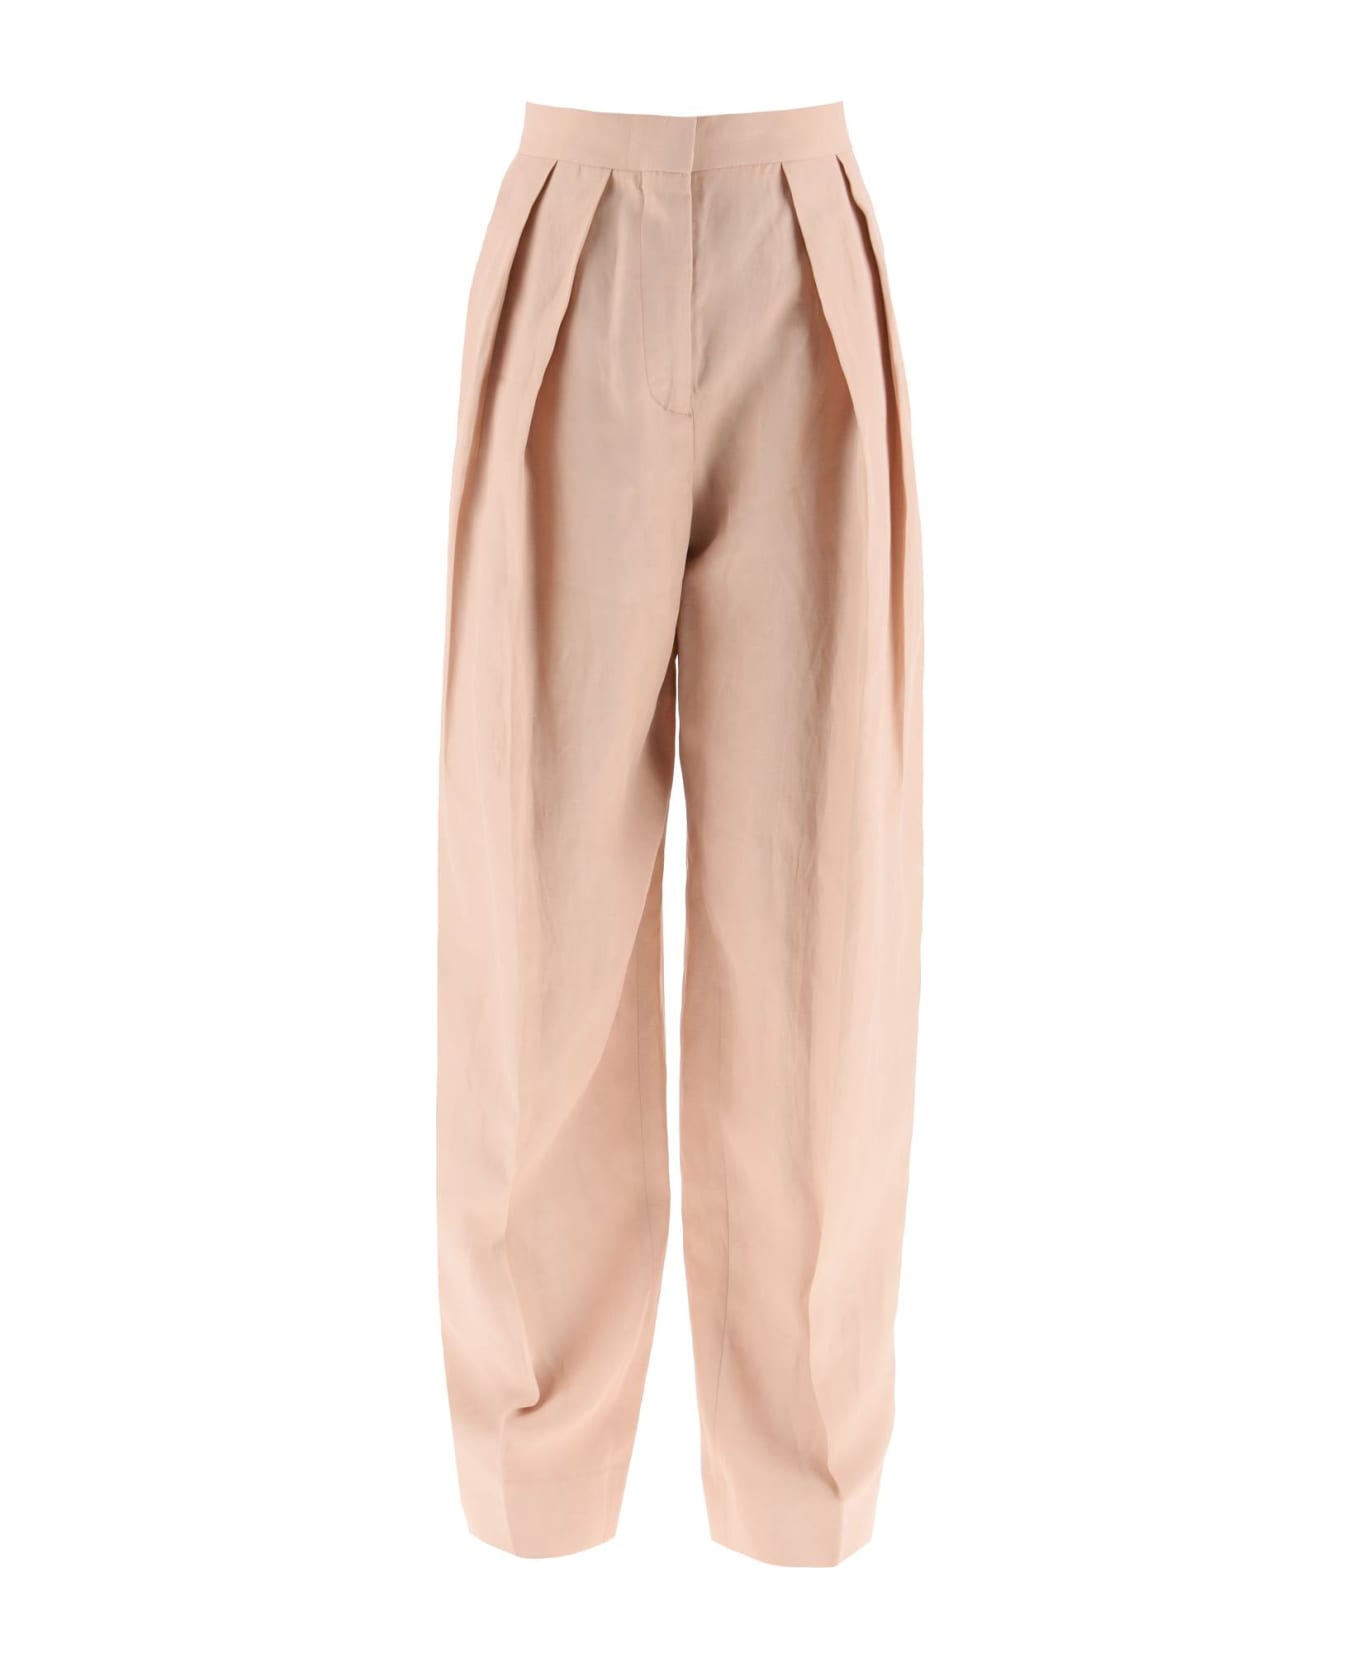 Stella McCartney Pants With Front Pleats - ROSE (Pink)